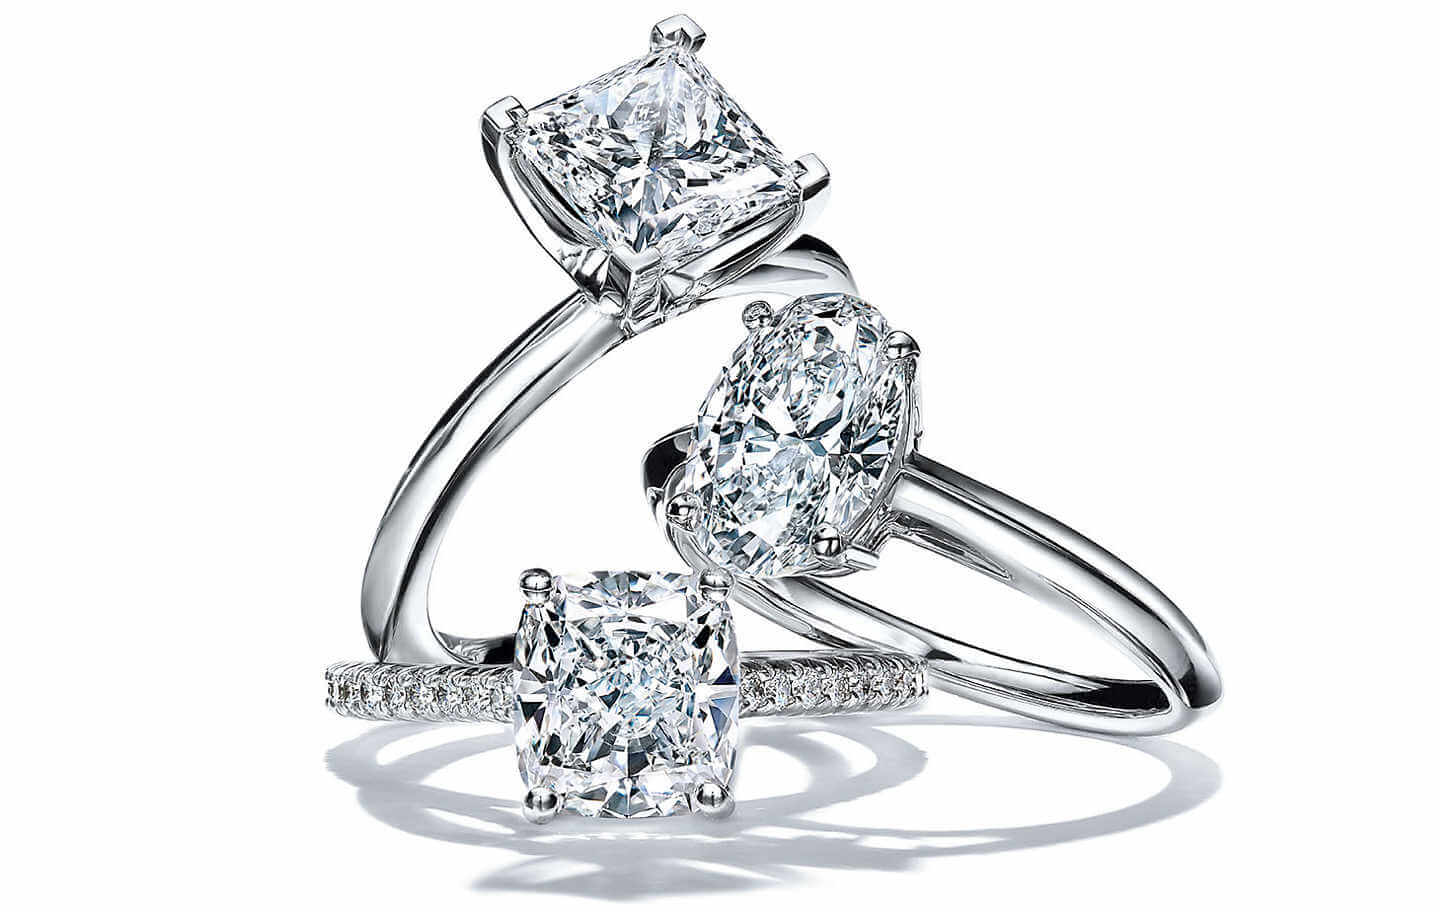 Pave and Side Stone Engagement Rings | Brian Gavin Diamonds